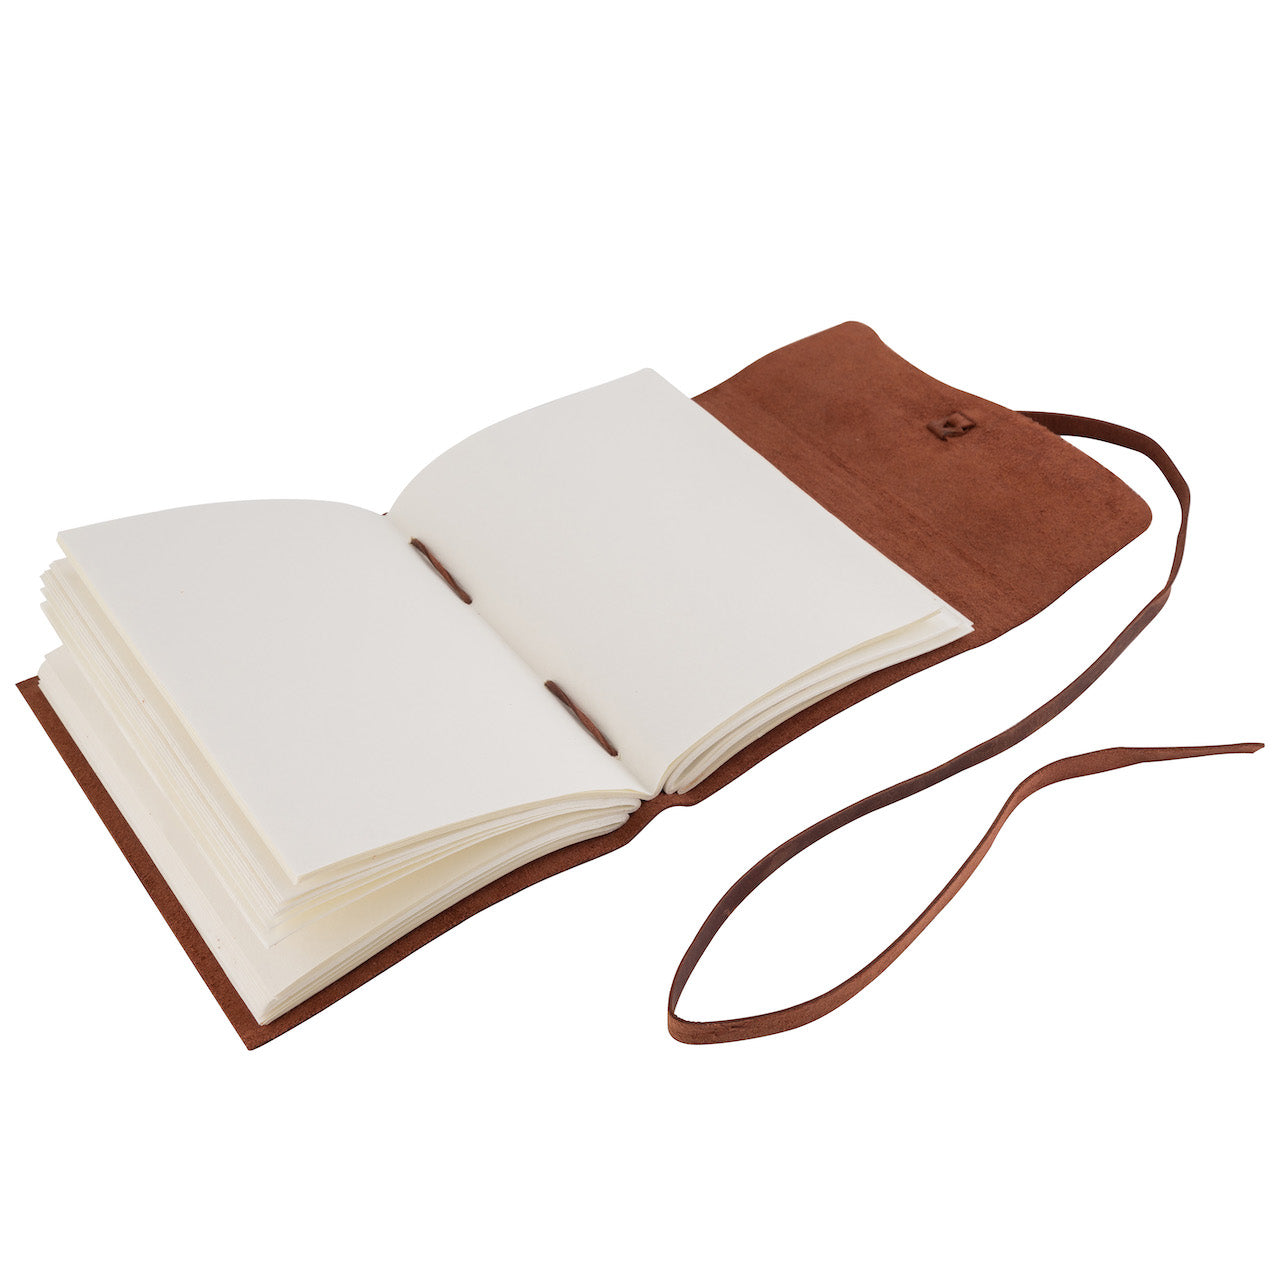 Tuk Tuk Press® Handmade Leather Oil Journal Planner, 200 Thick Unlined Recycled Cotton Pages